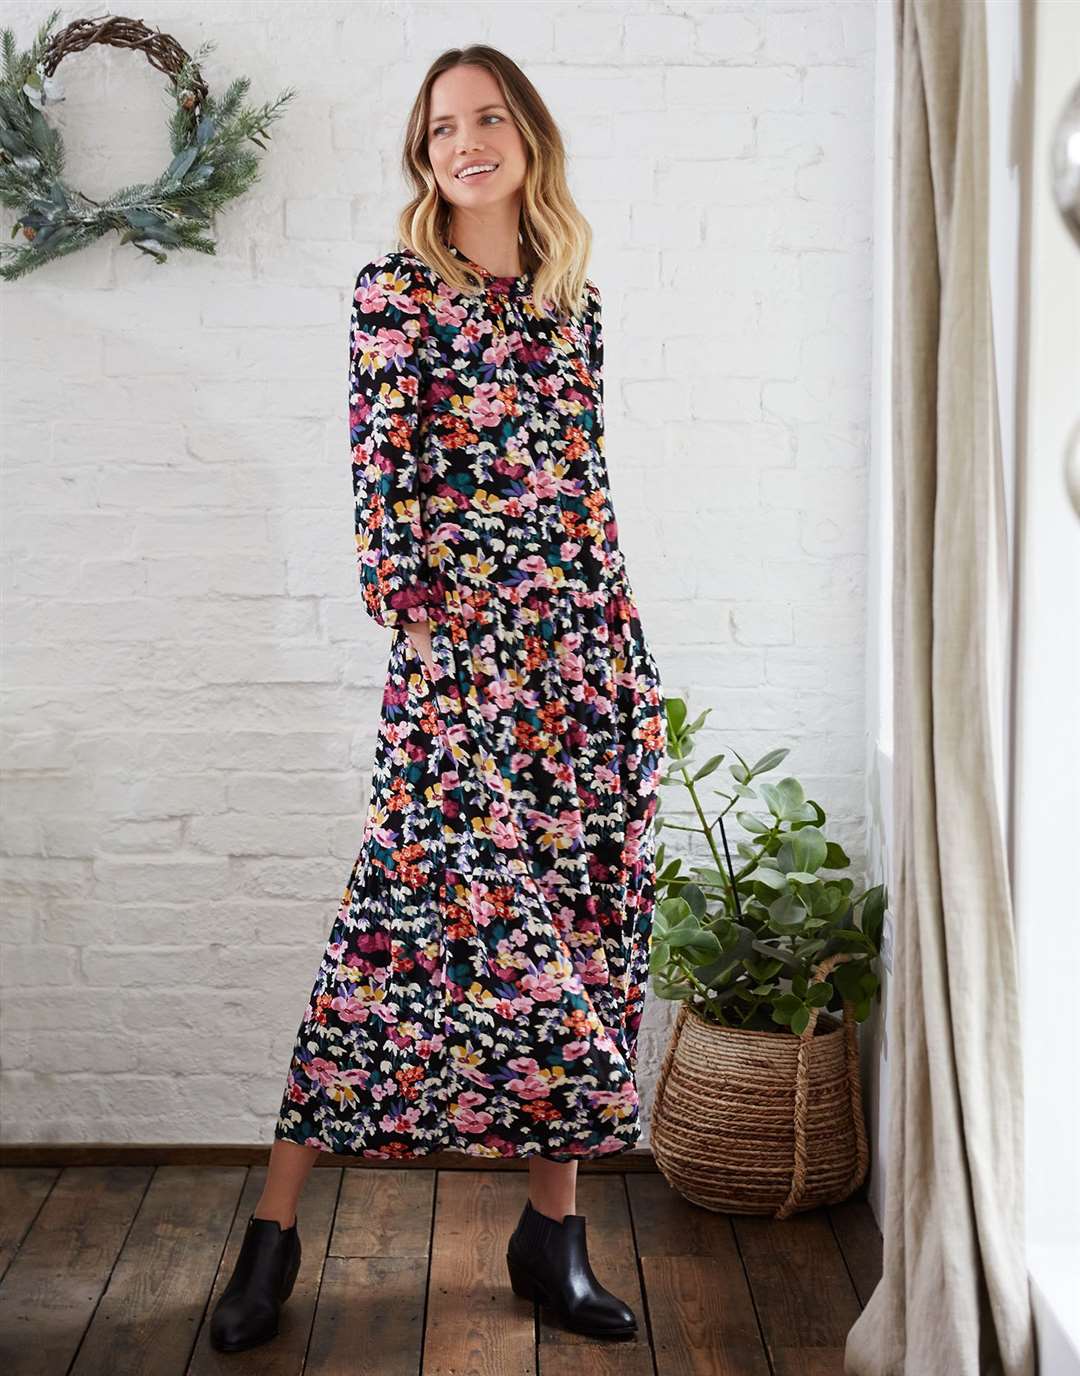 Joules is renowned for pretty prints and patterns.